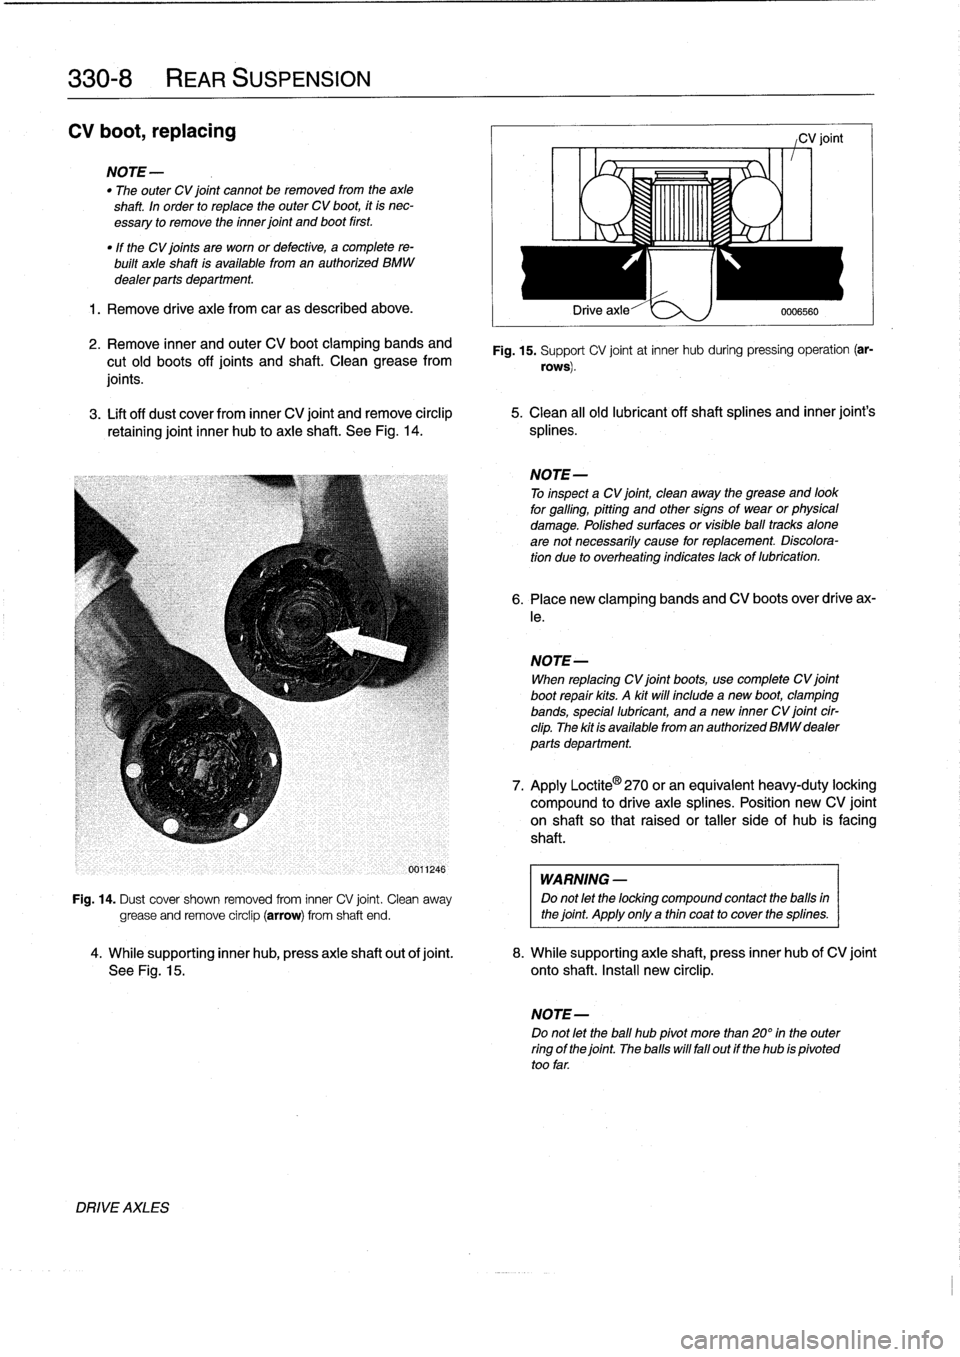 BMW 318i 1998 E36 Workshop Manual 
330-
8

	

REAR
SUSPENSION

CV
boot,
replacing

NOTE-

"
The
outer
CV
joint
cannot
be
removed
from
the
axle
shaft
.
In
order
to
replace
the
outer
CV
boot,
it
is
nec-
essary
to
remove
the
inner
joint
